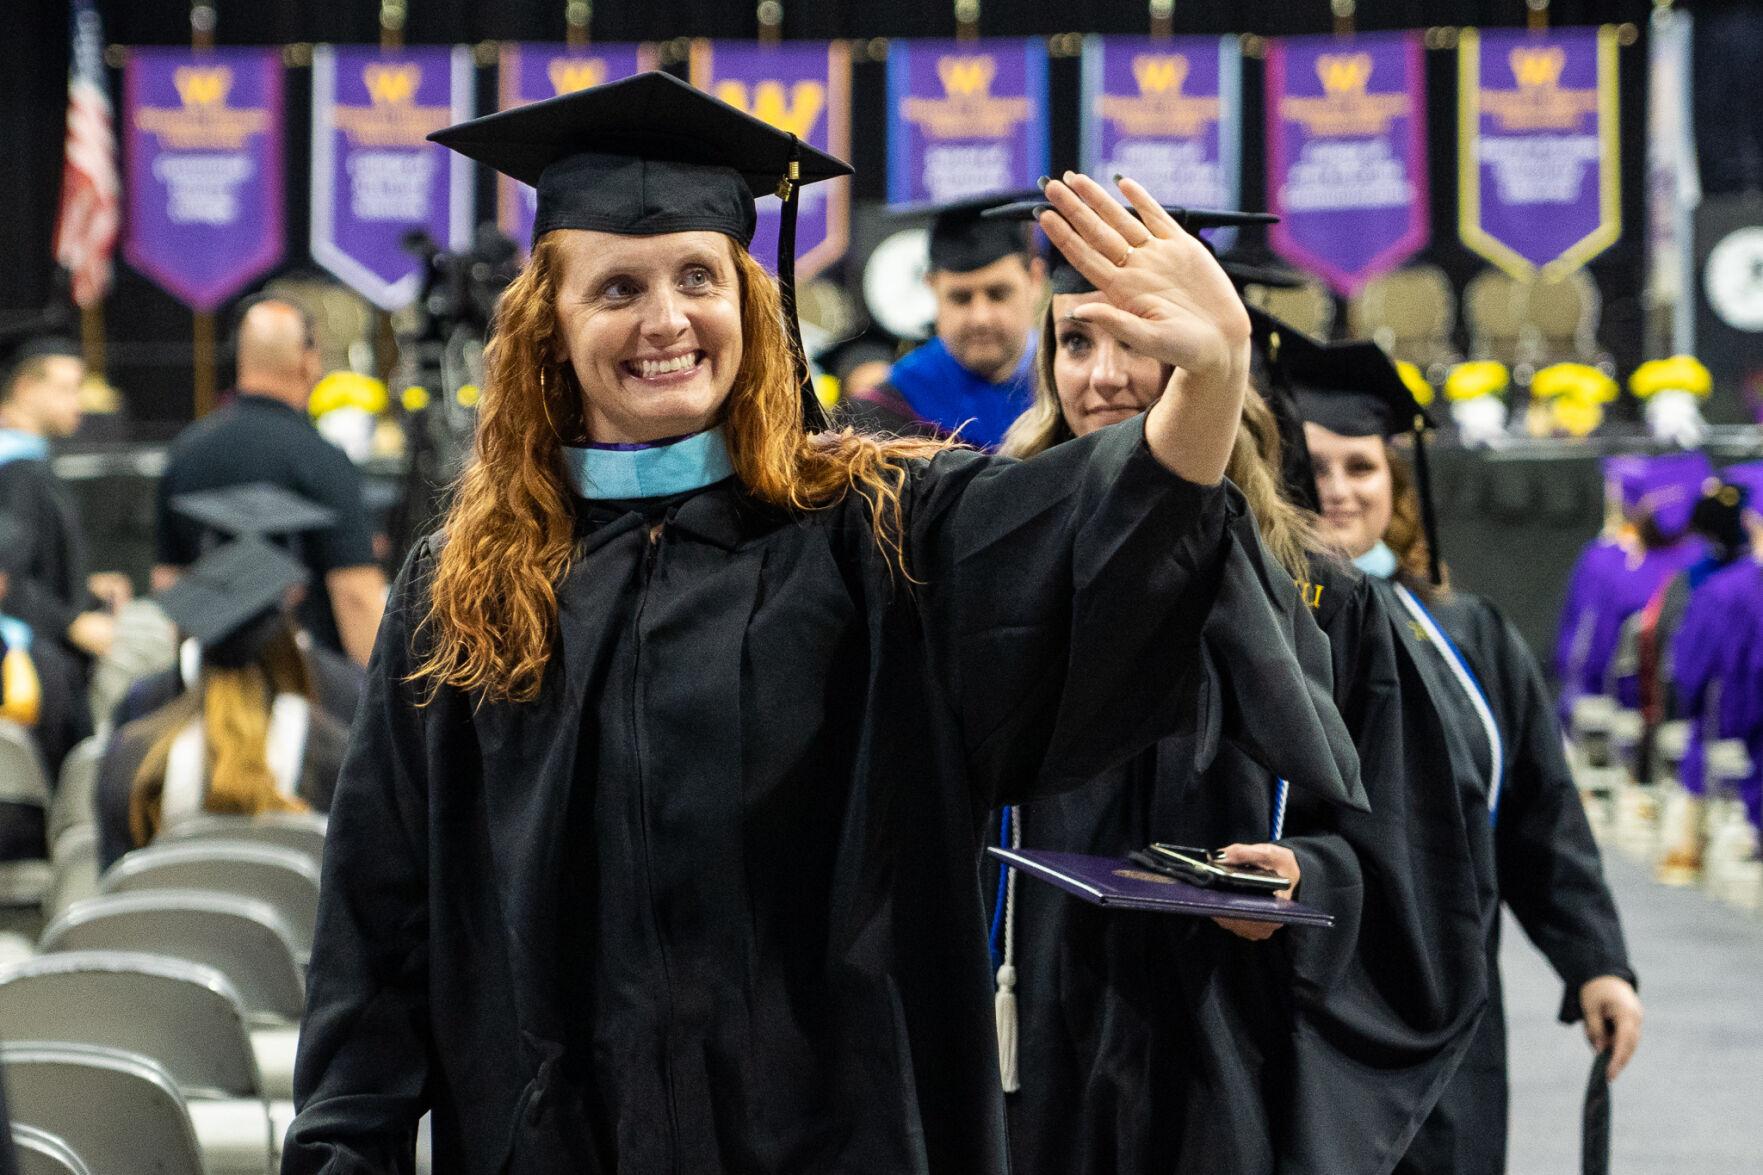 Western Illinois University to receive 840k in academic support, SEL